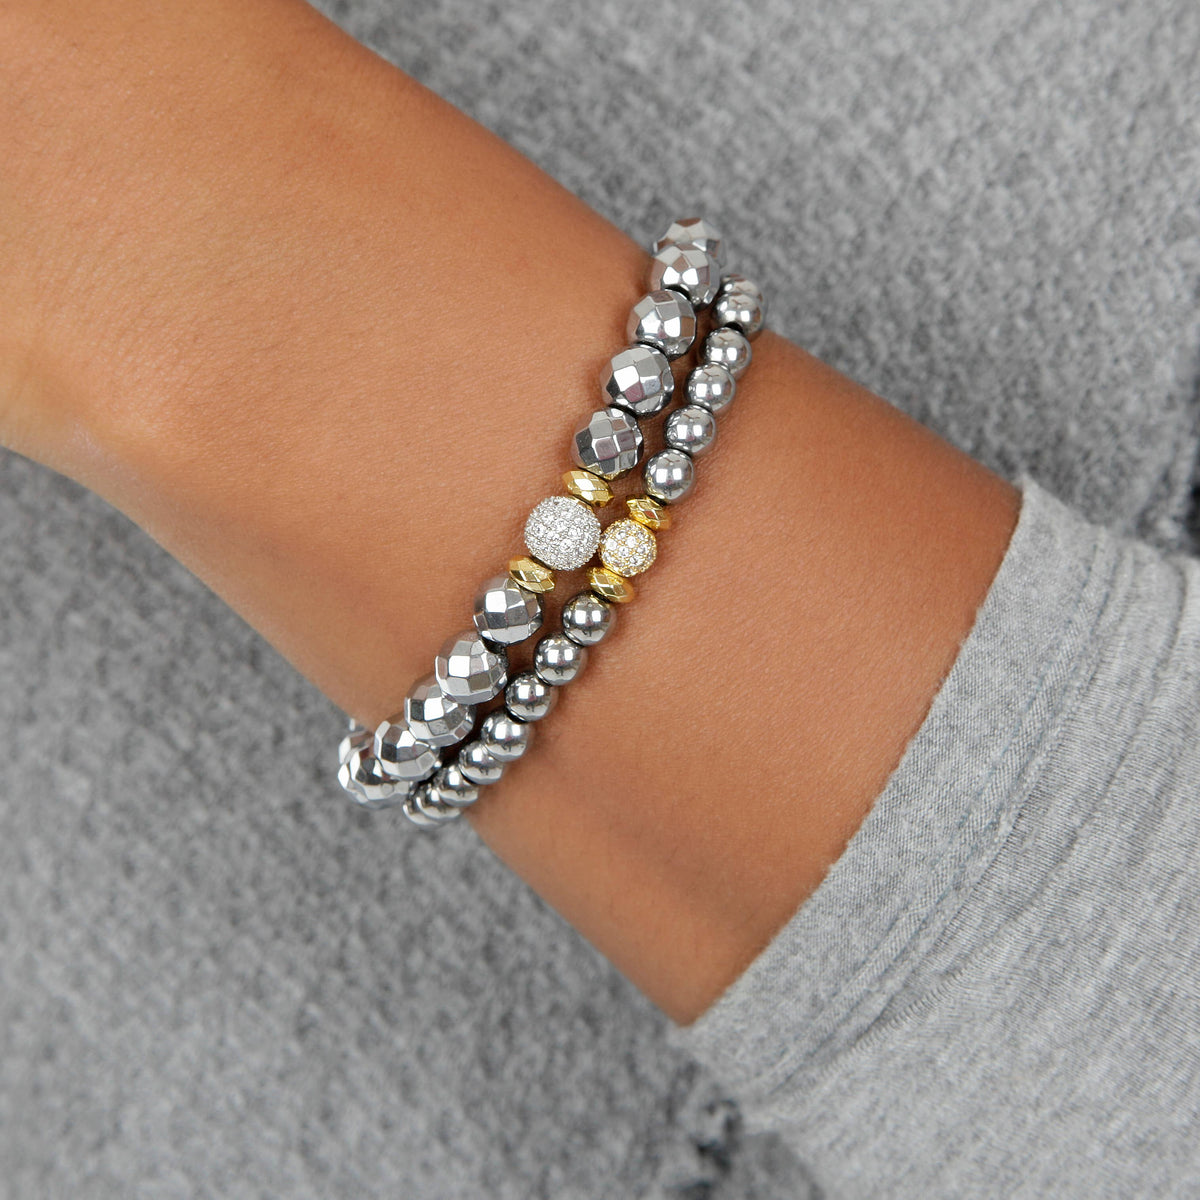 Expressions Bracelets - Mixed Metal Silver and Gold Beaded Bracelet